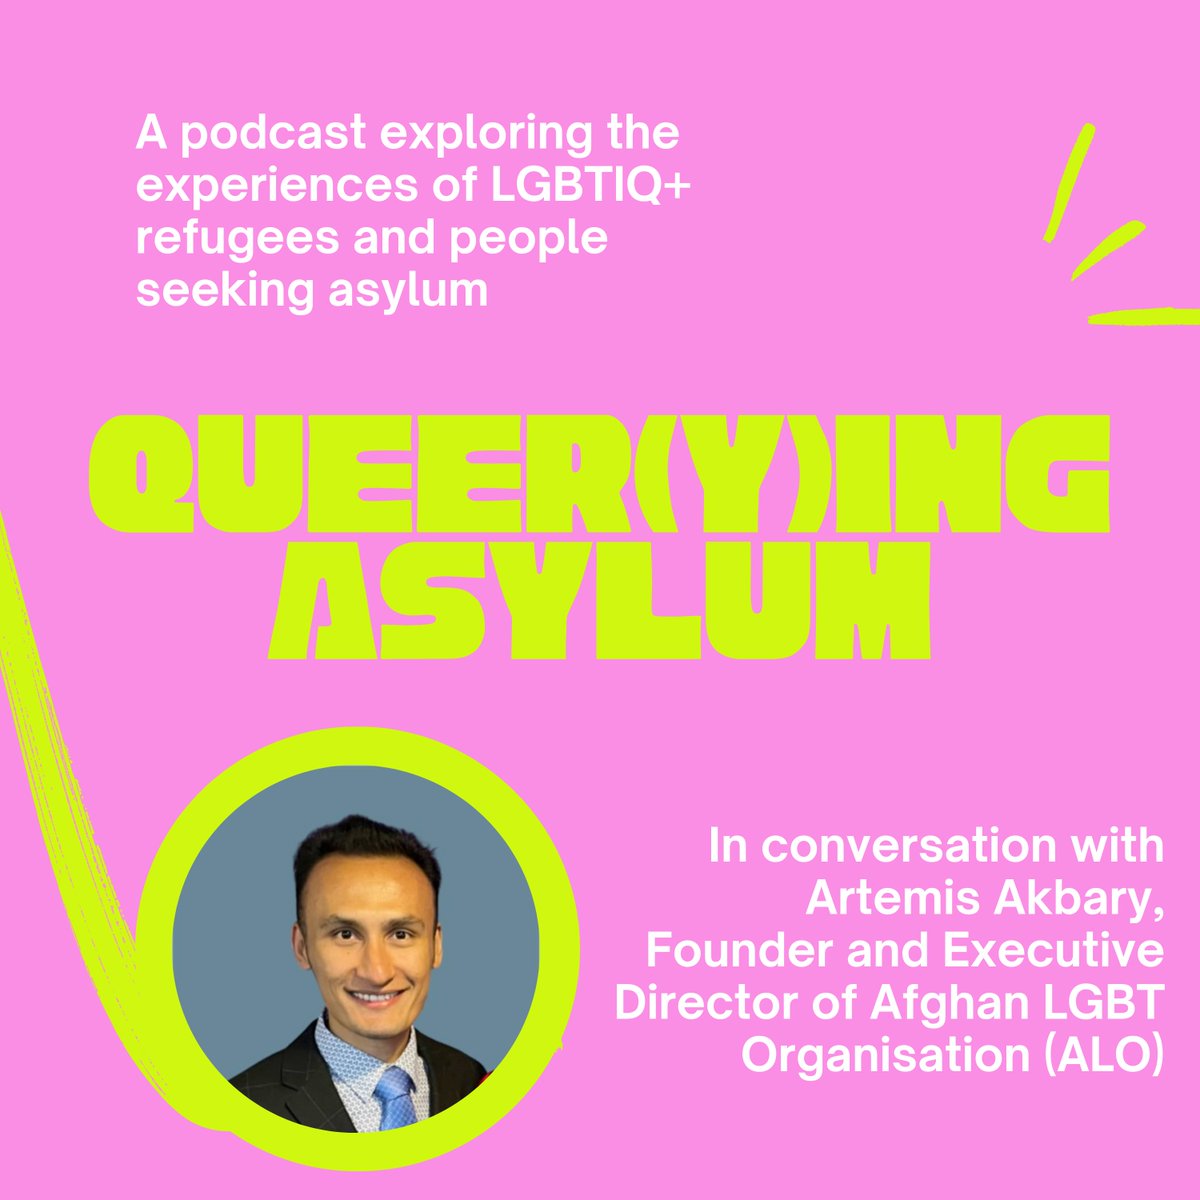 🎉 Get ready for an exciting new episode of the Queer(y)ing Asylum Podcast dropping tonight at midnight! Join us for a conversation with the incredible Artemis Akbary as we explore employment, healthcare, education, and other challenges facing LGBTIQ+ refugees in Turkey 🎧